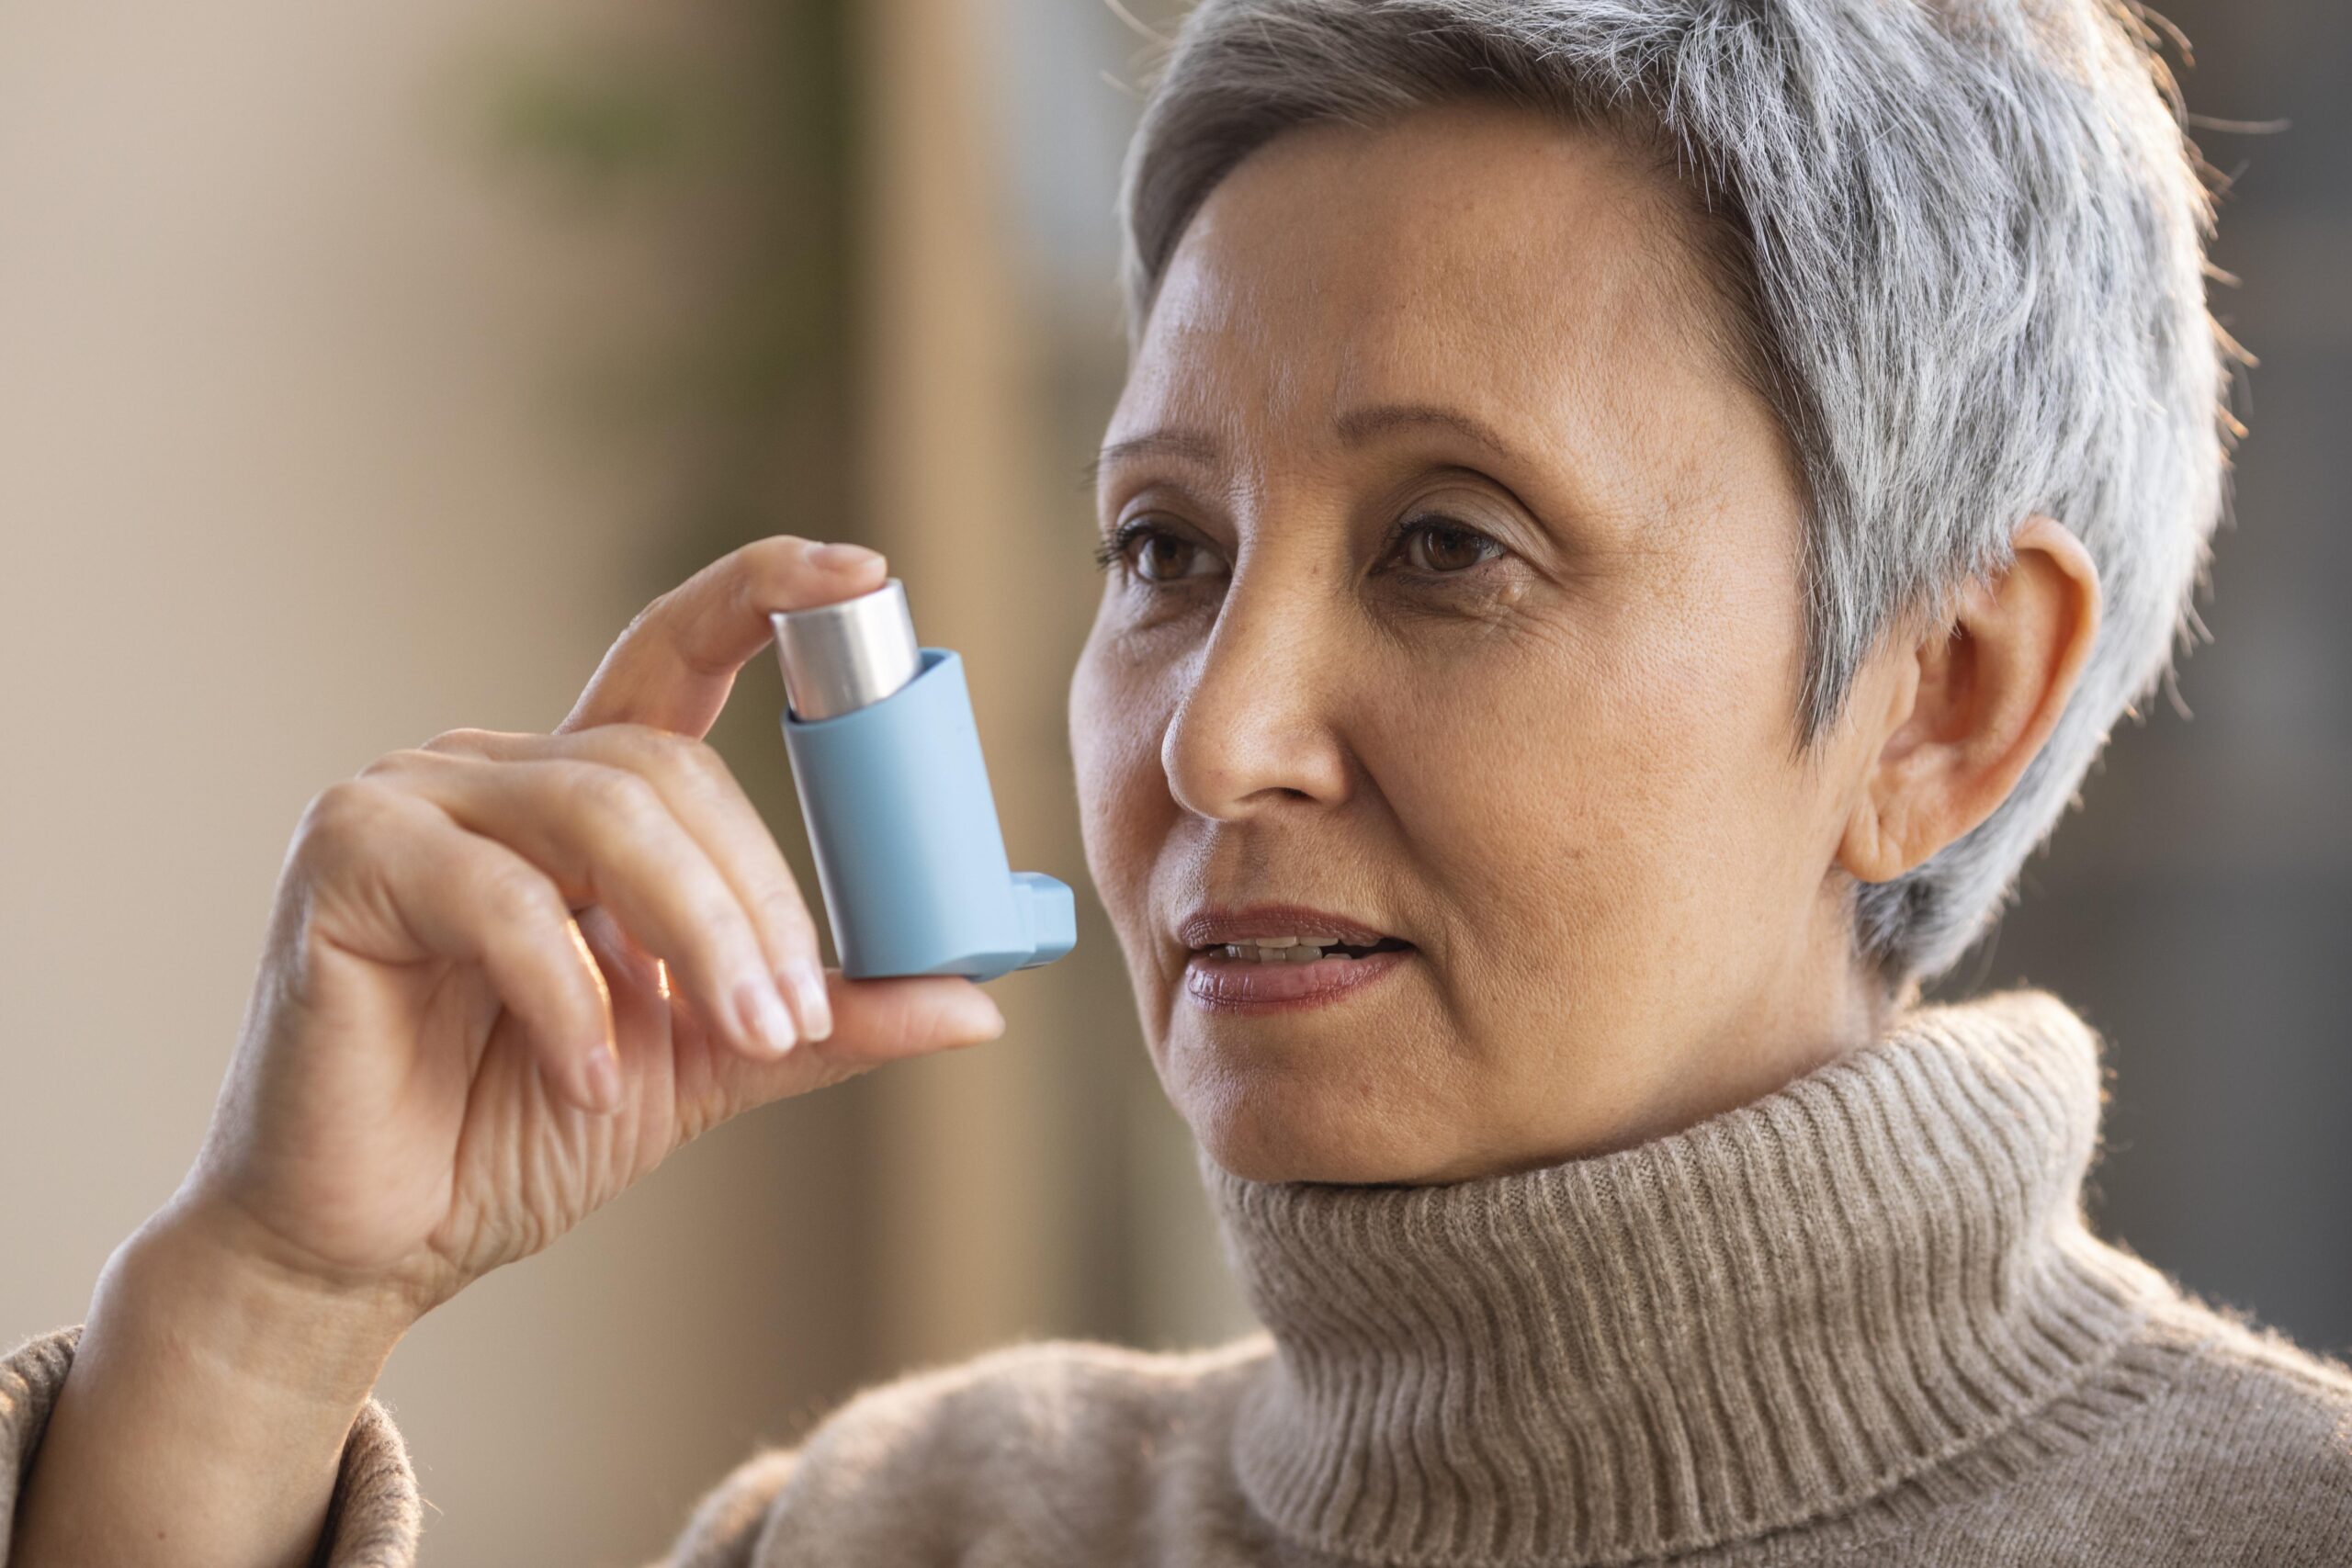 Asthma Management for Seniors: Inhalers, Lifestyle, and More